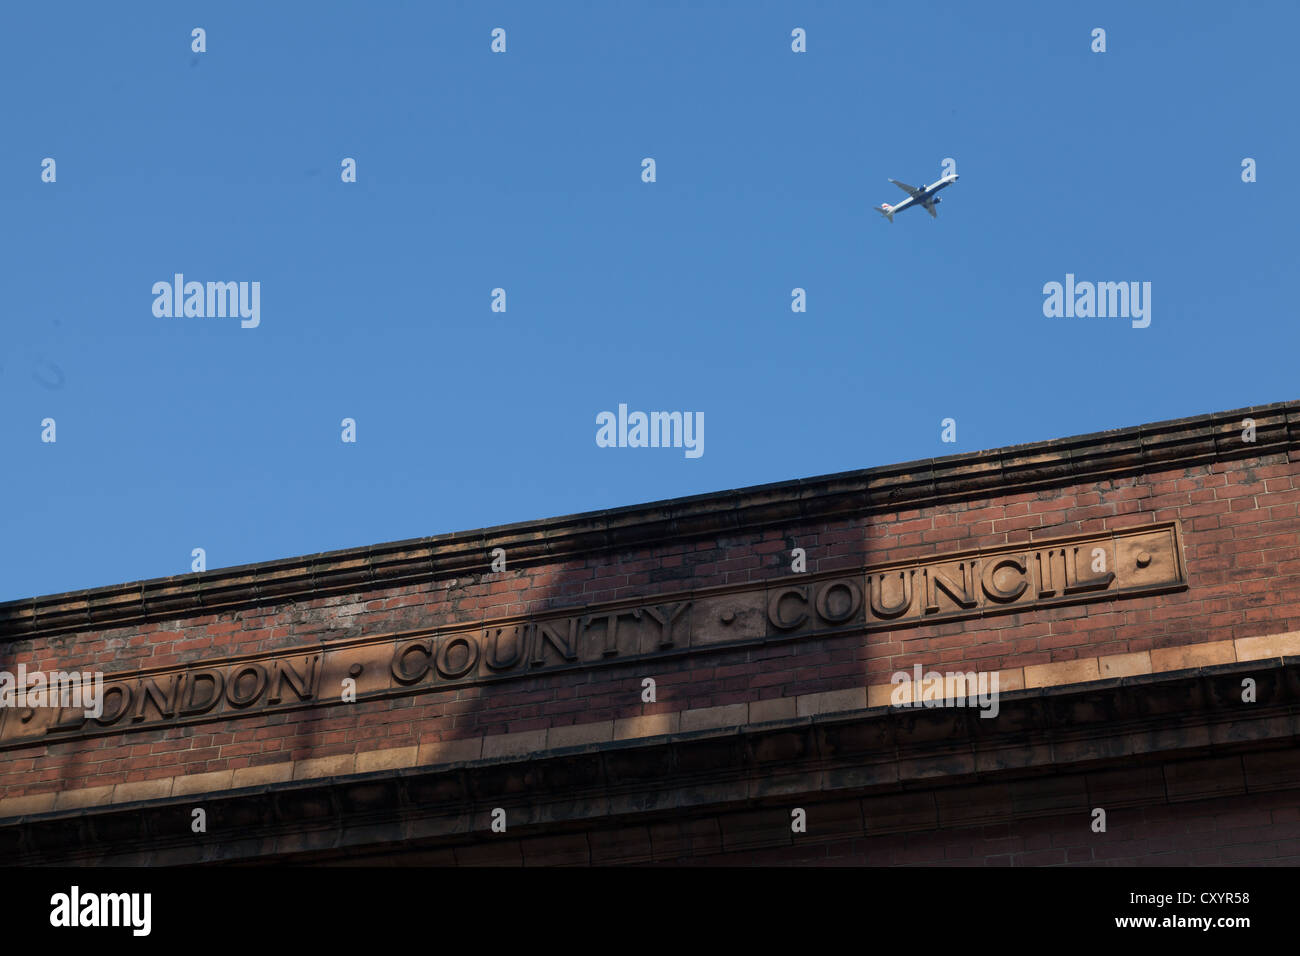 Plane flying through blue sky above old building with London County Council sign in brickwork Bermondsey, London Stock Photo